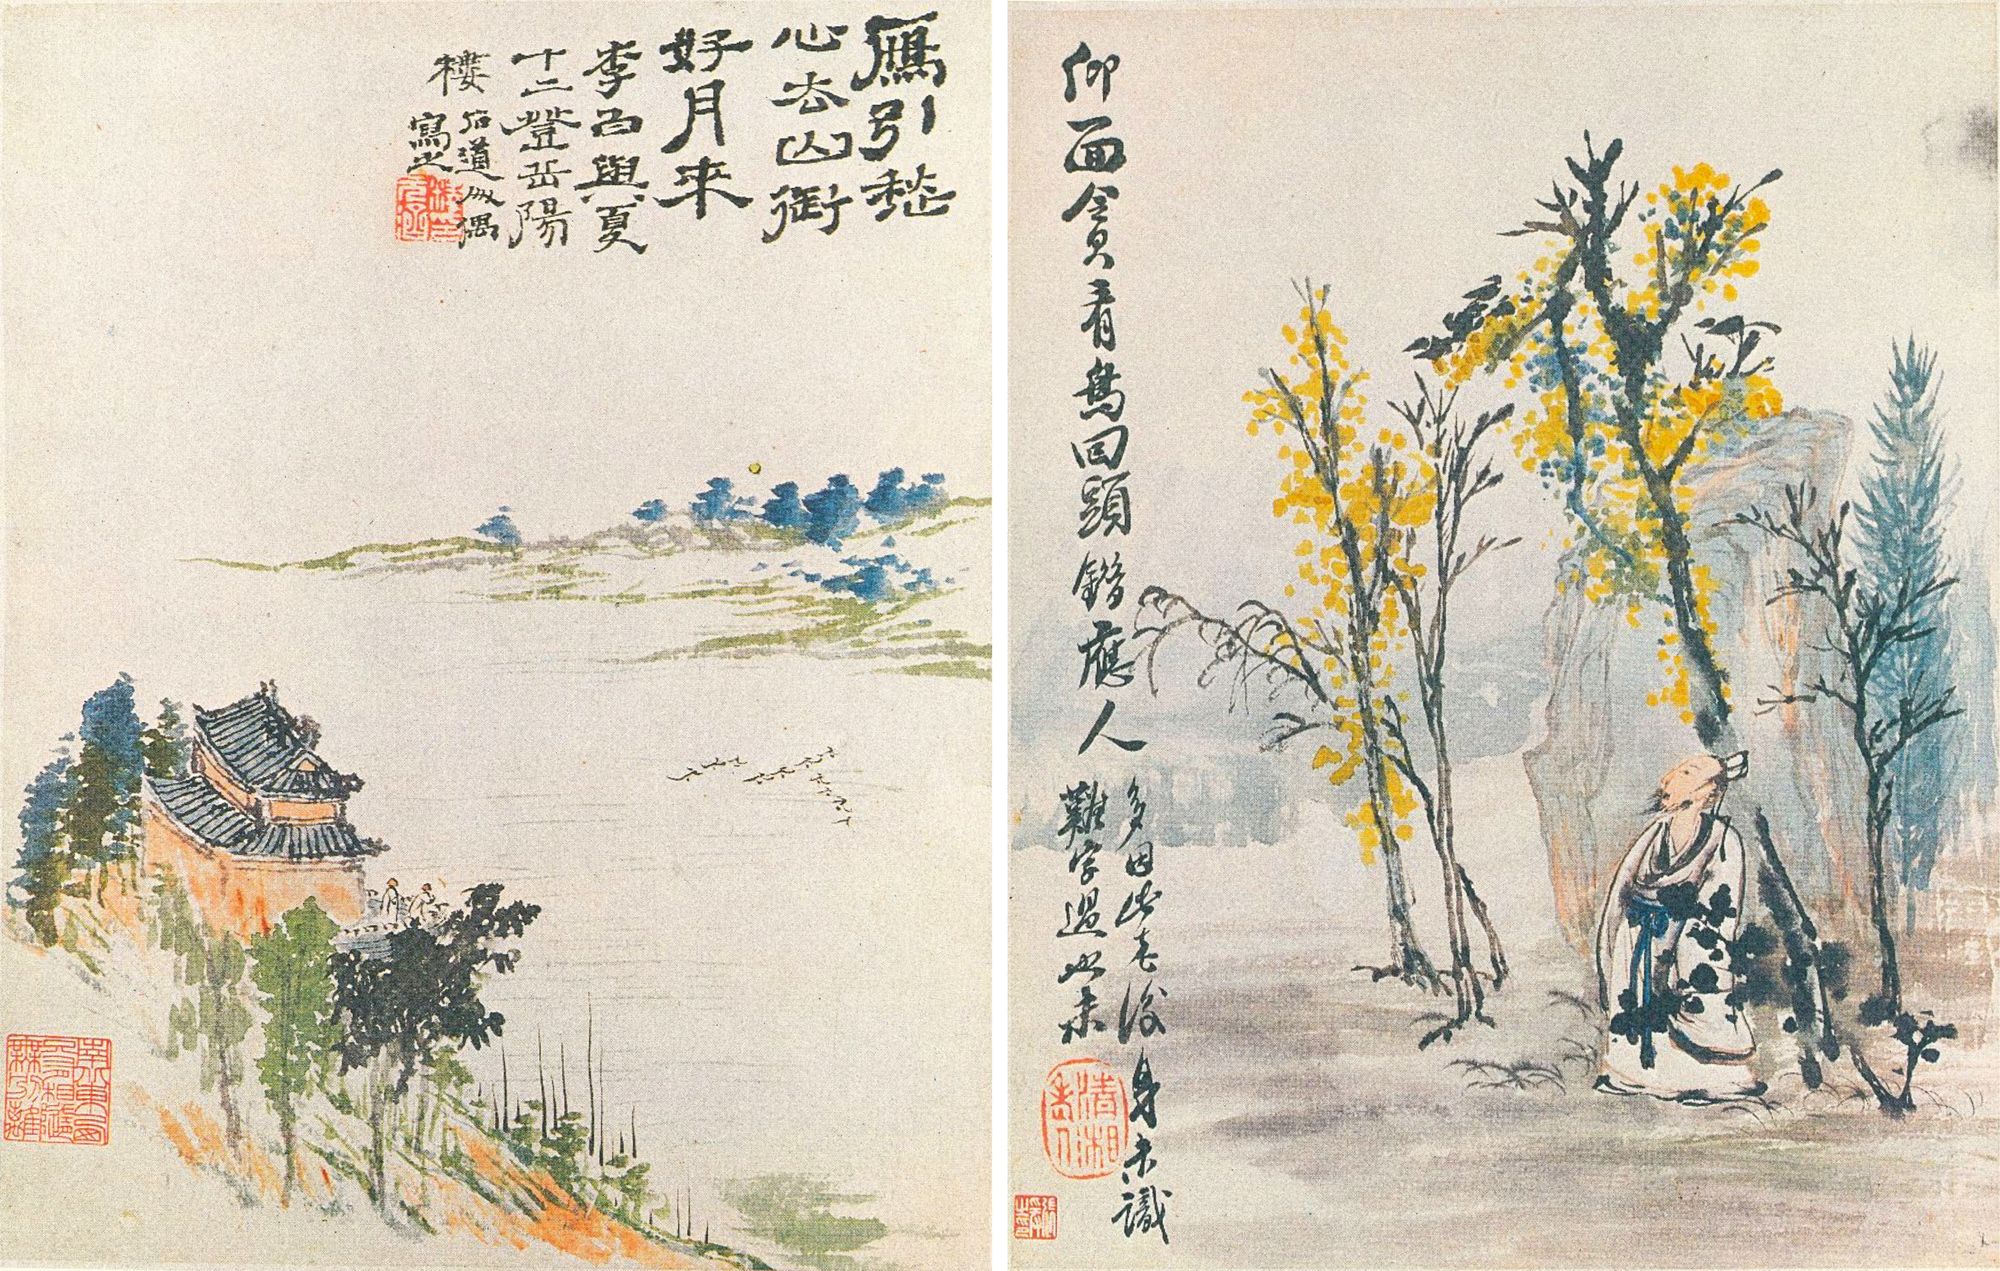 Paintings by Tao-chi: (left) Moonlit Geese, (right) Bird Watching